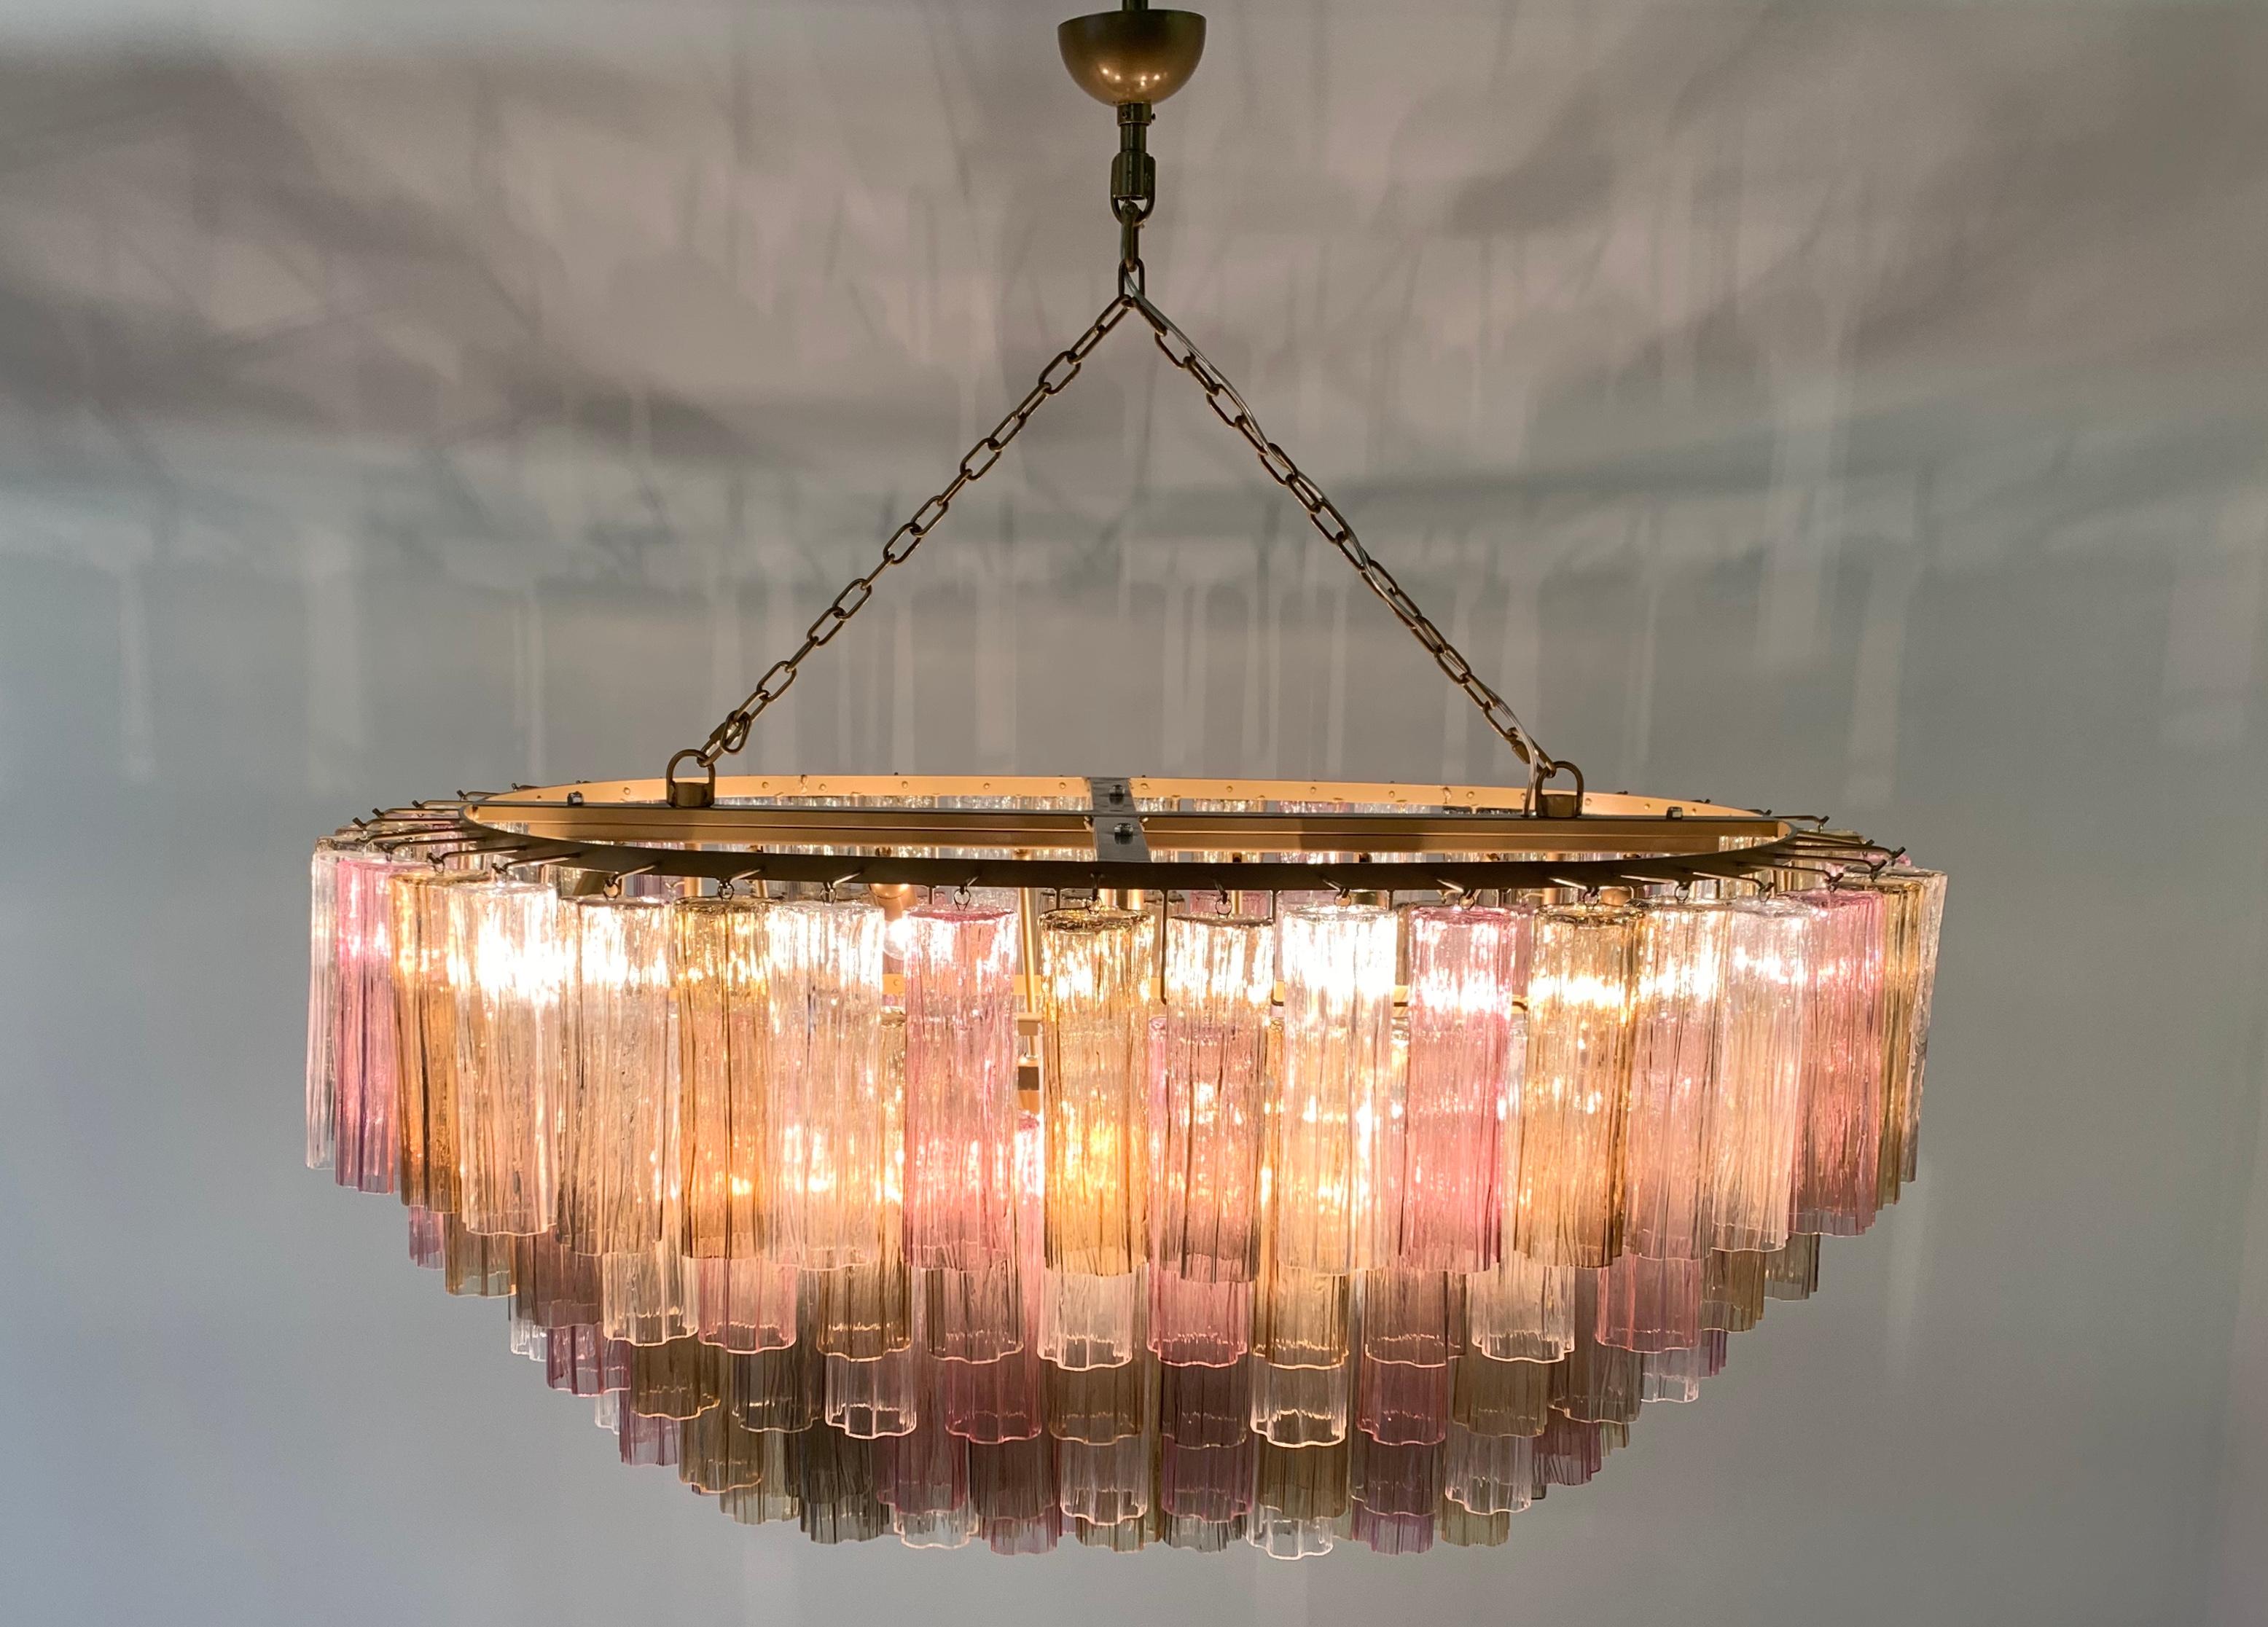 Large luxurious Murano glass chandelier in the style of Venini.
The chandelier is made up of 170 pieces of colored Murano glass.